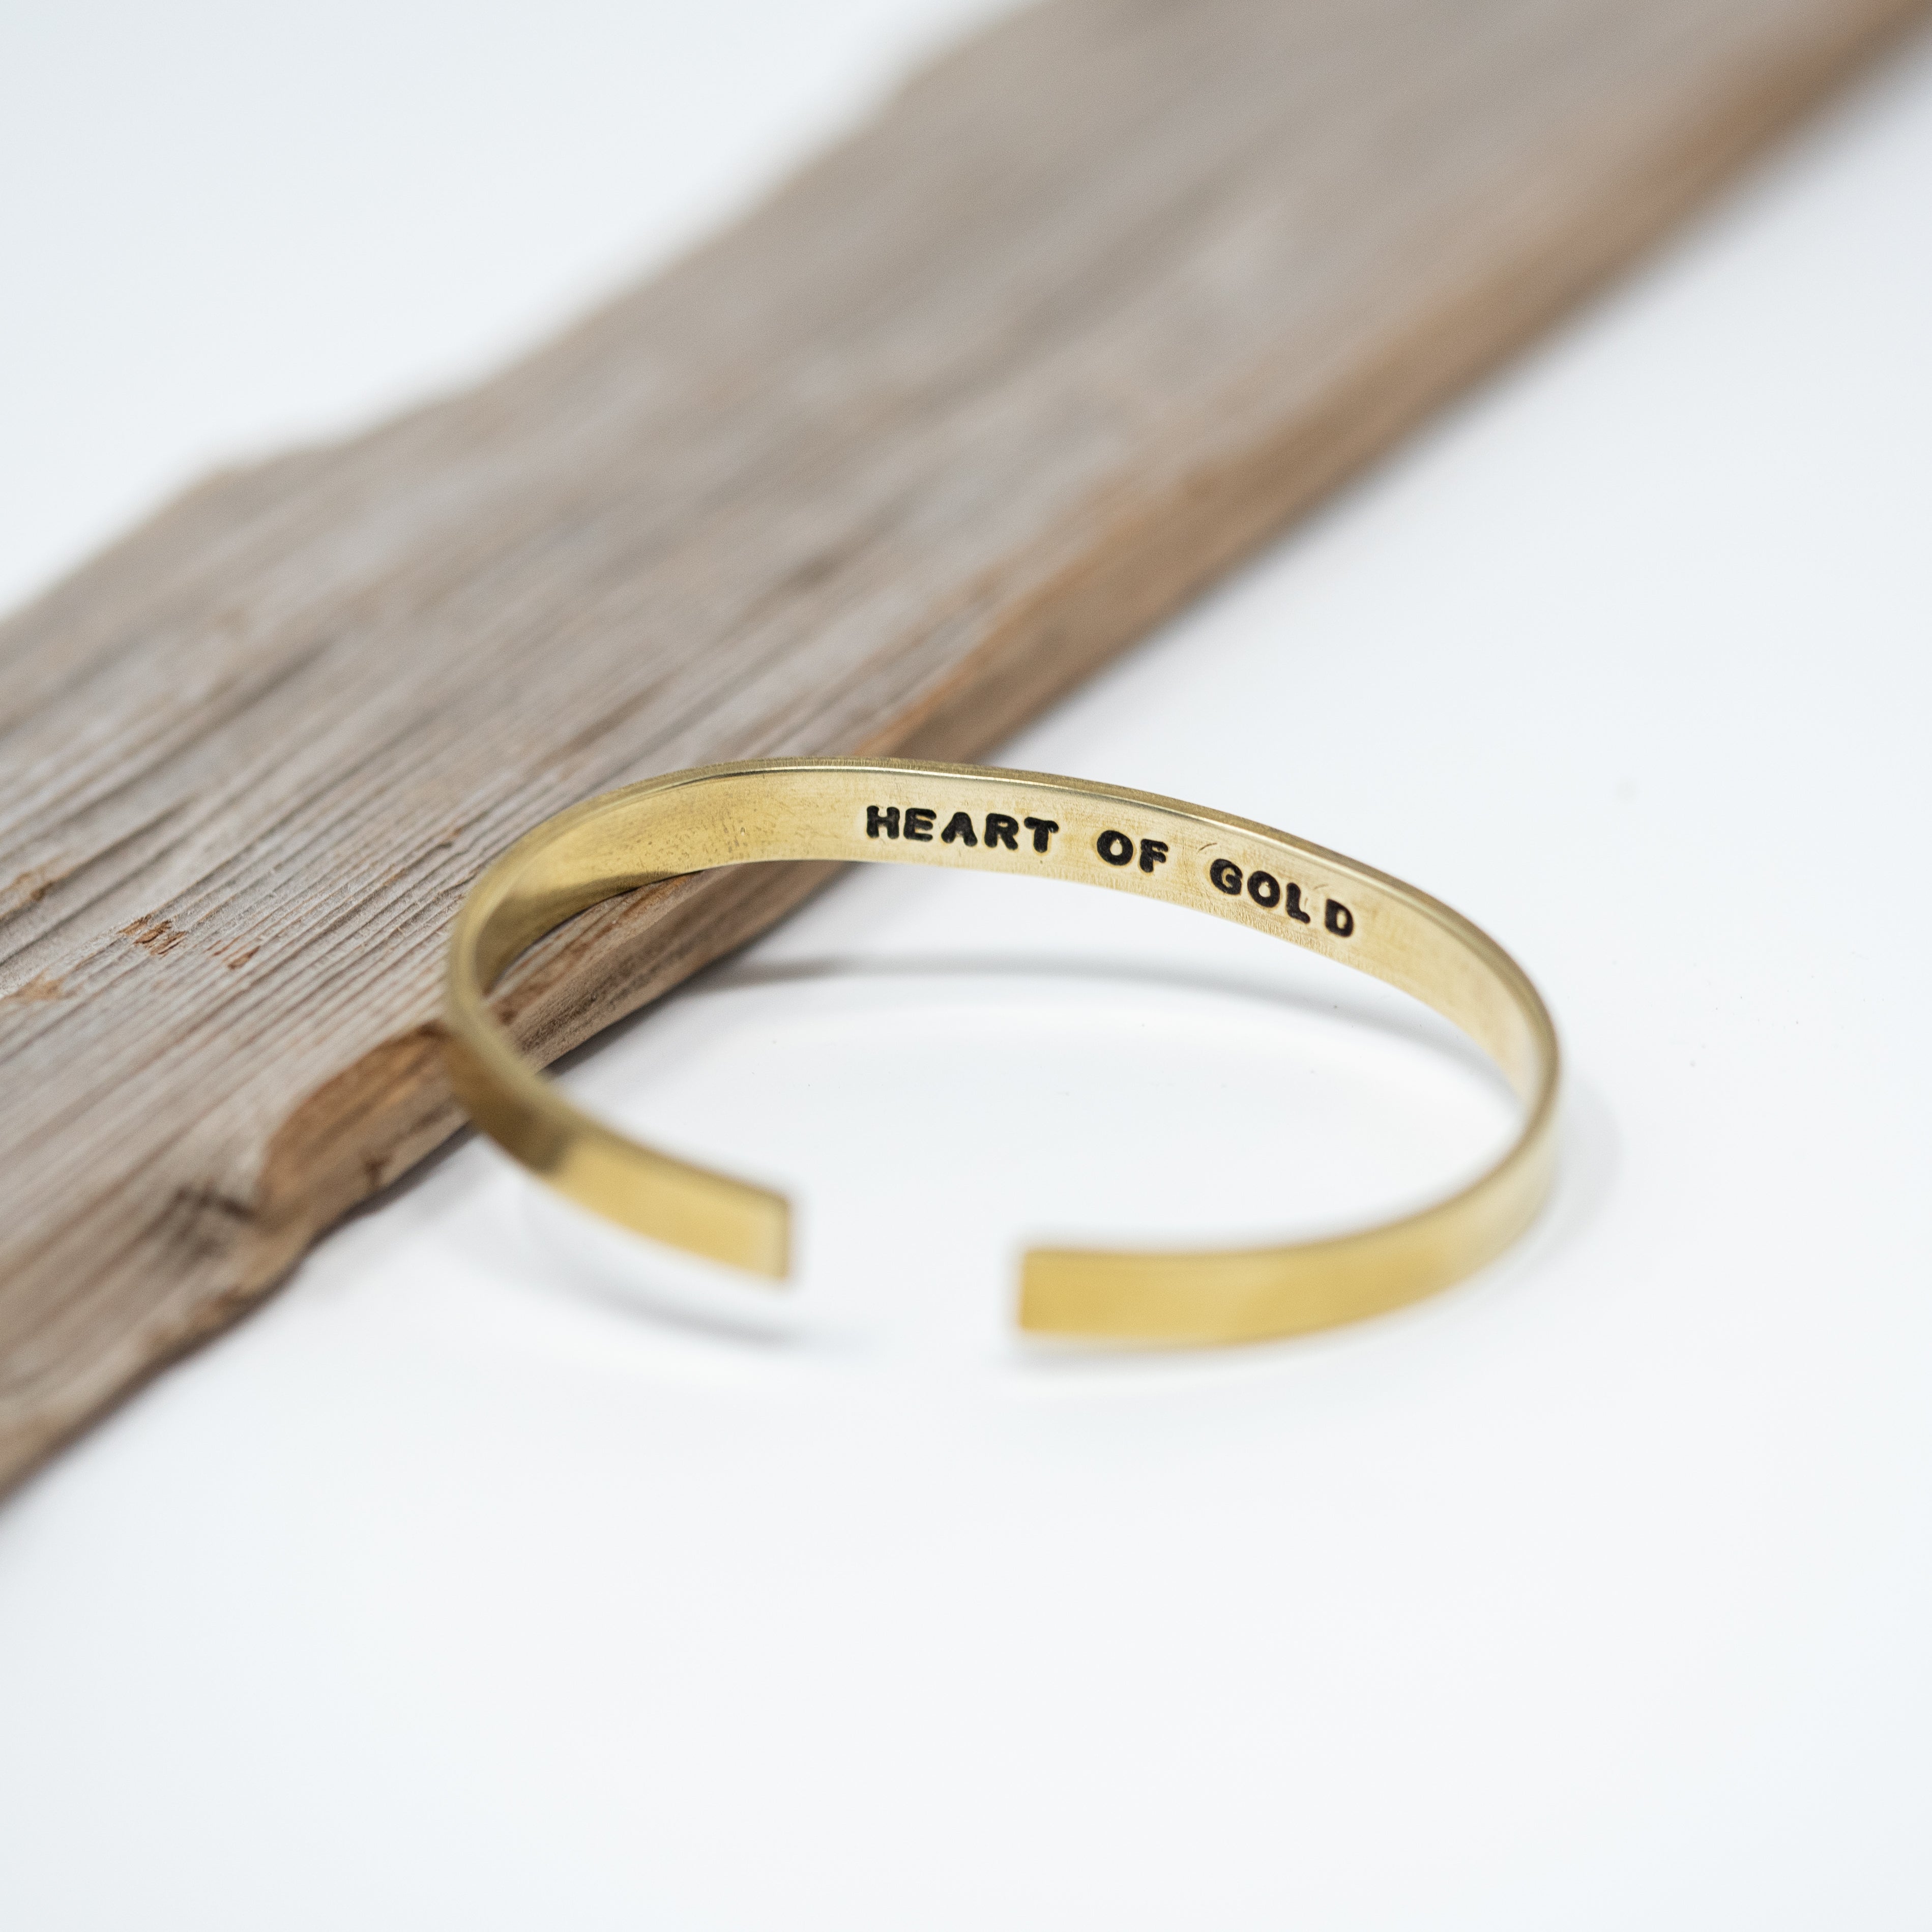 Brass cuff bracelet with phrases hand stamped on the inside of the bracelet  filled in with black coloring